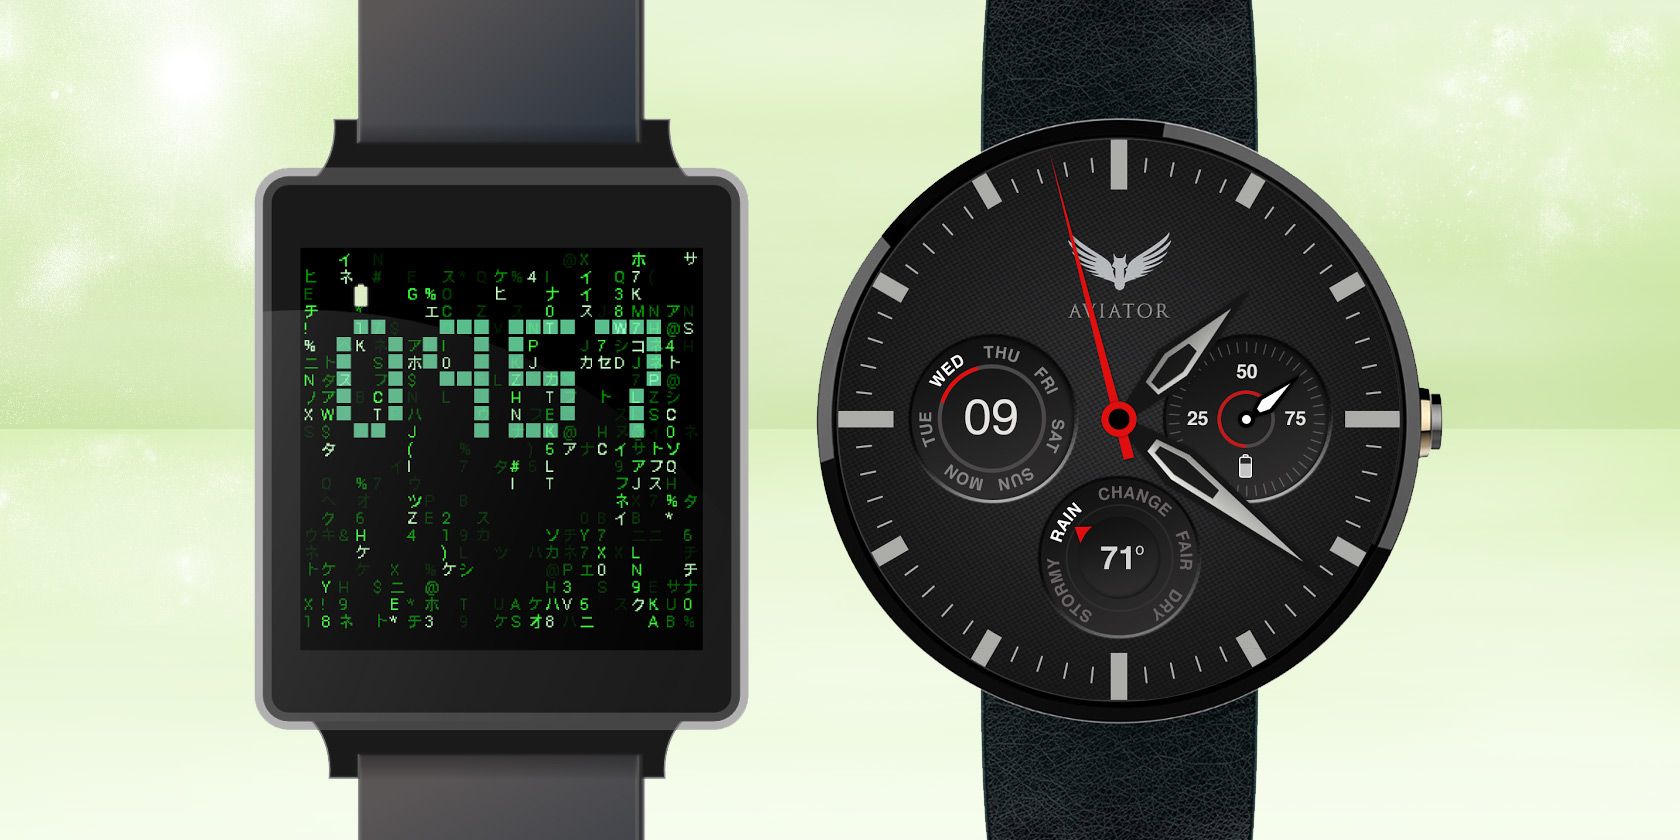 6 Cool Watch Faces for Your Android Wear Smartwatch